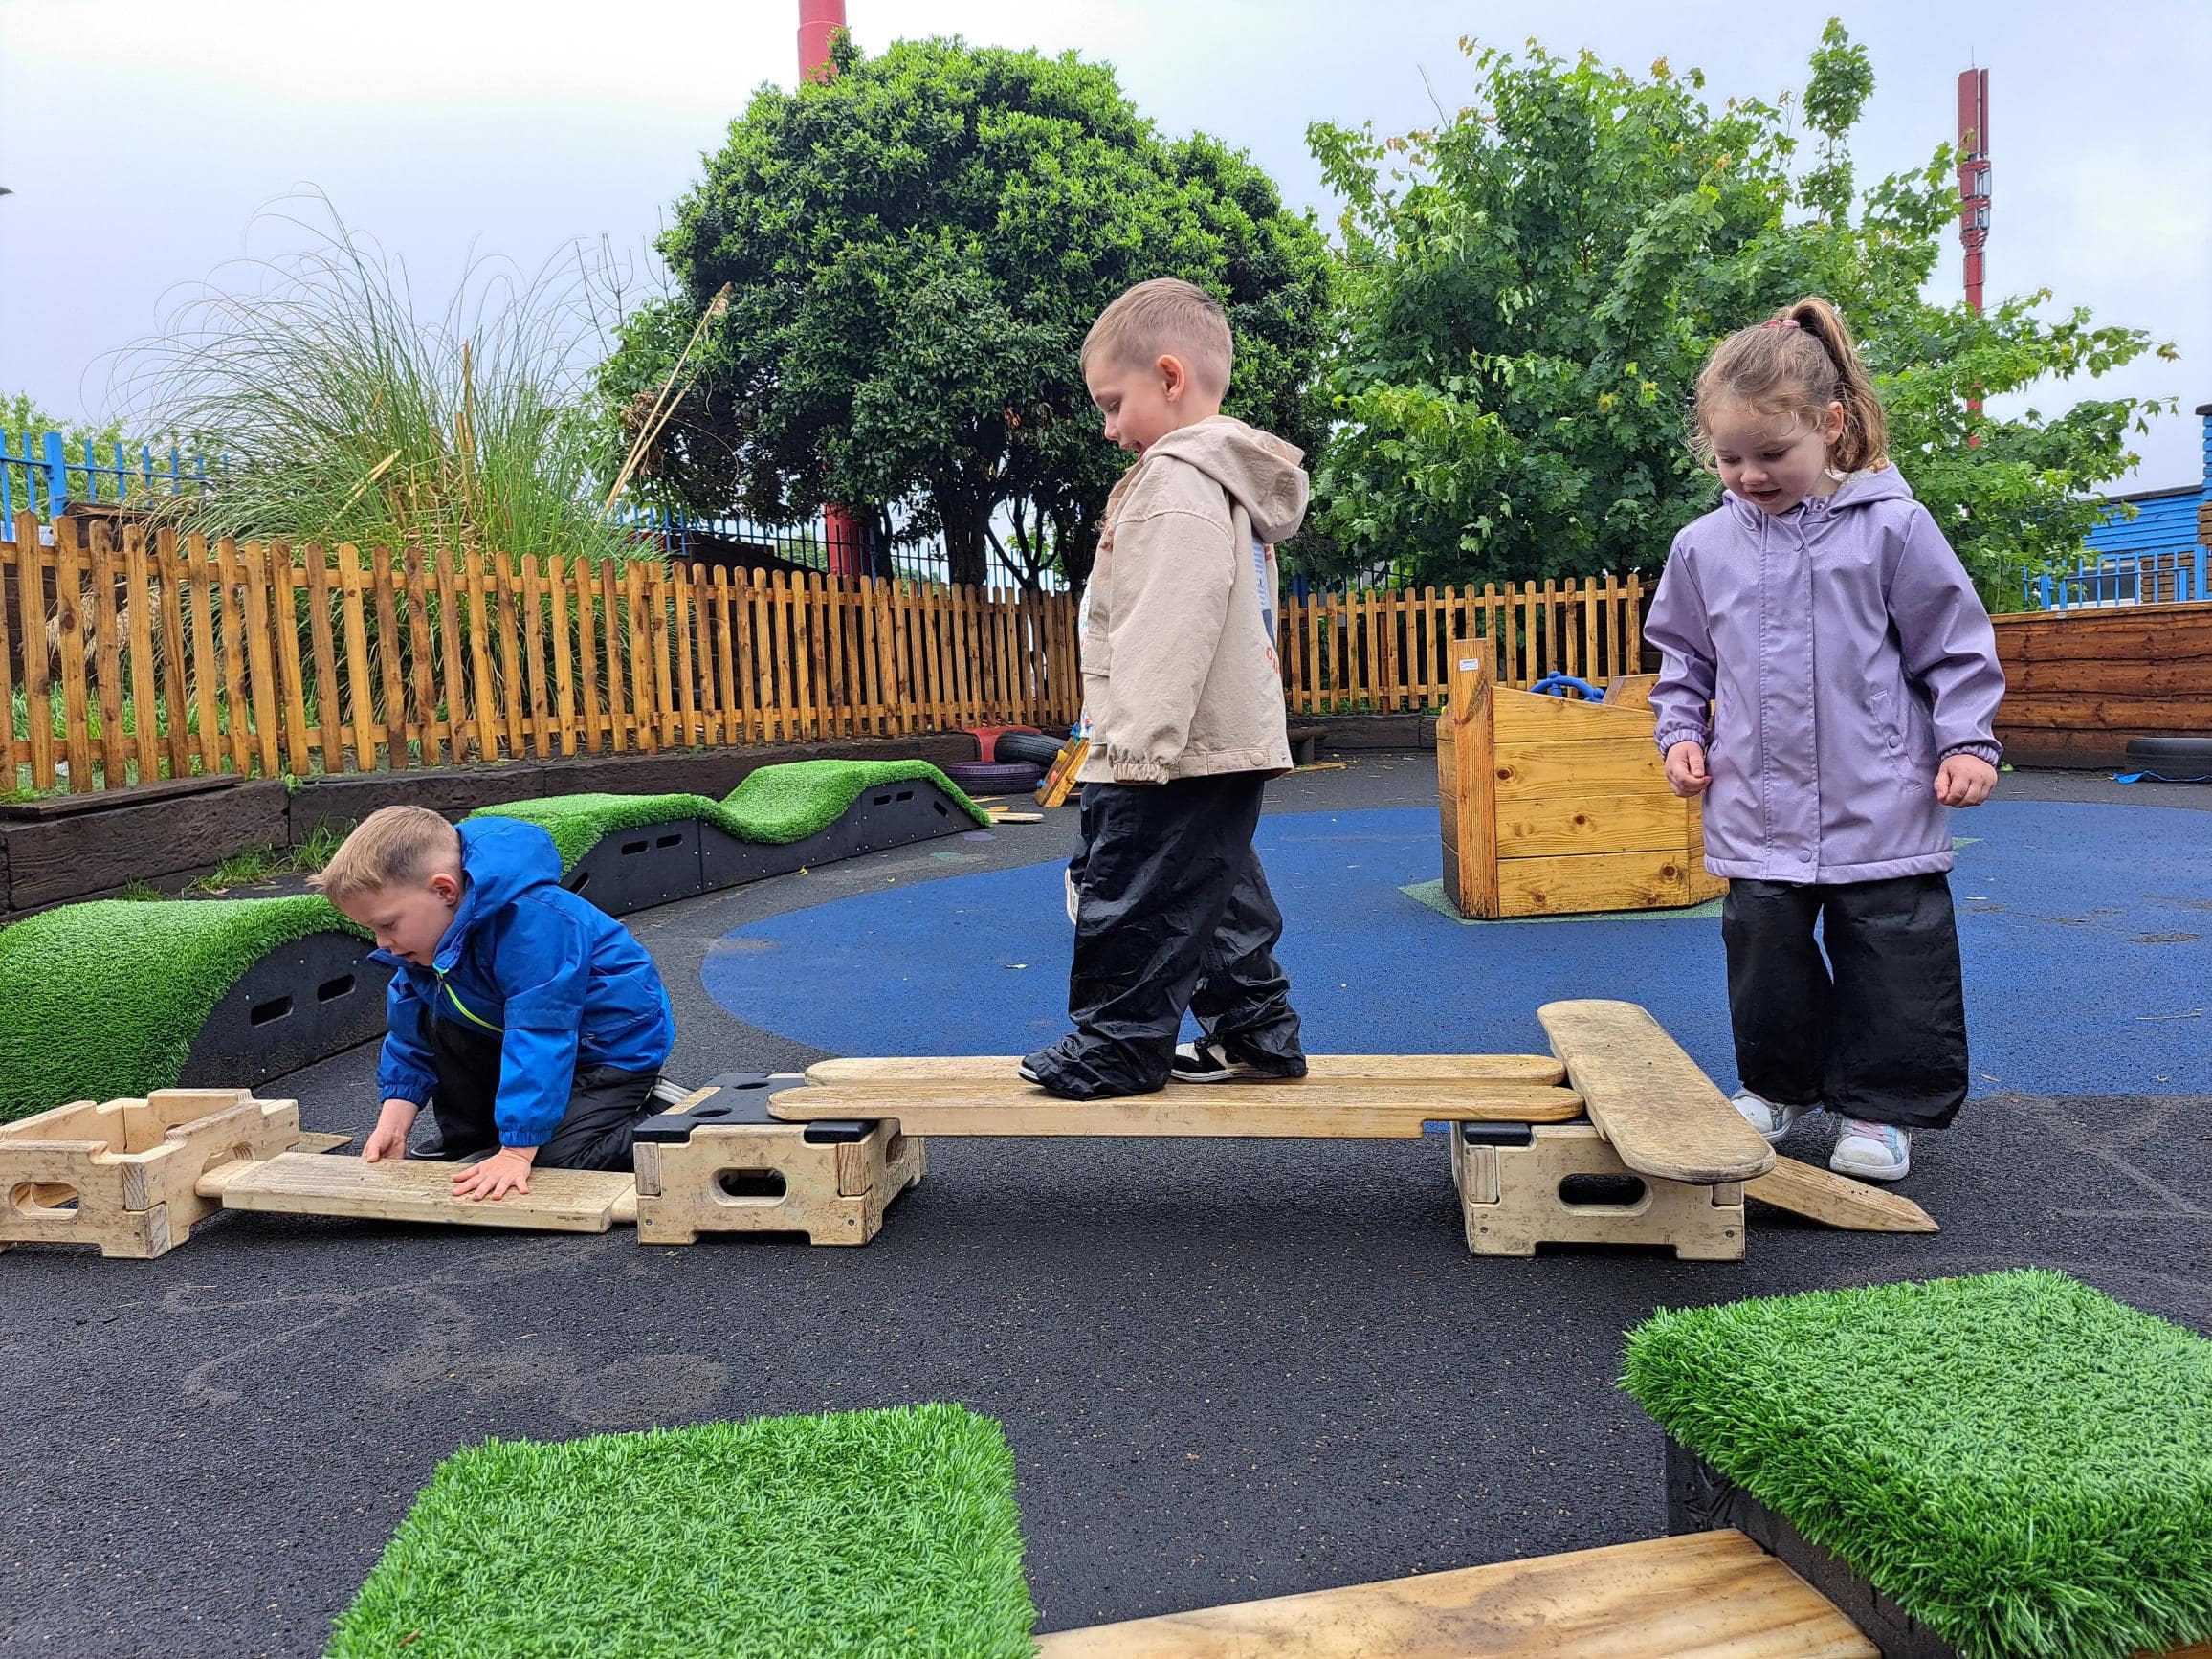 2 children are walking across a wooden plank which is connected to two wooden blocks. One child is on the floor and is connecting another wooden plank to a block to create a bridge.